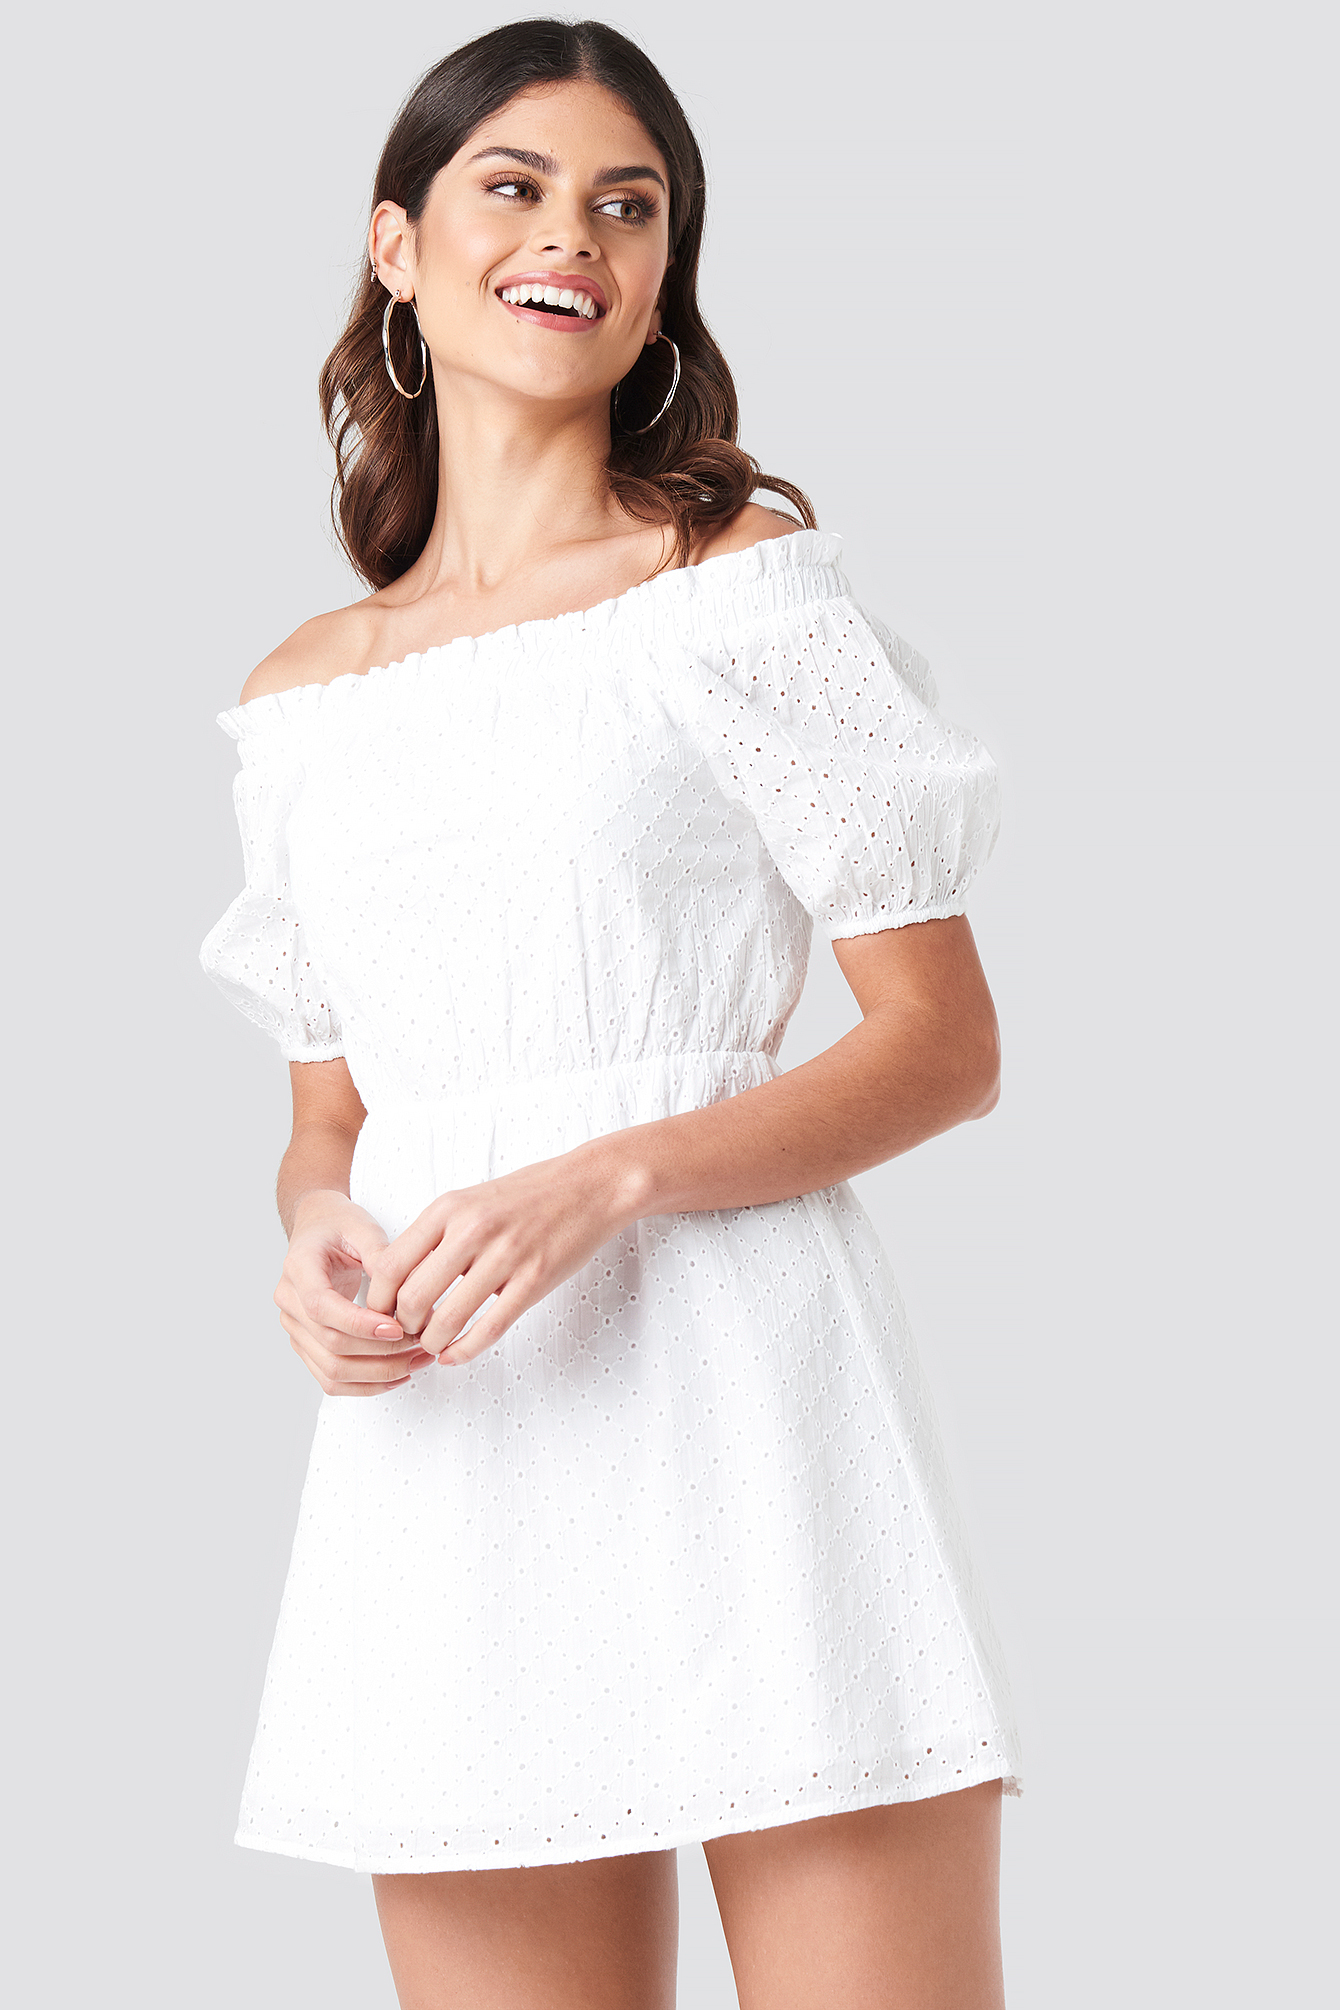 all white off the shoulder dress